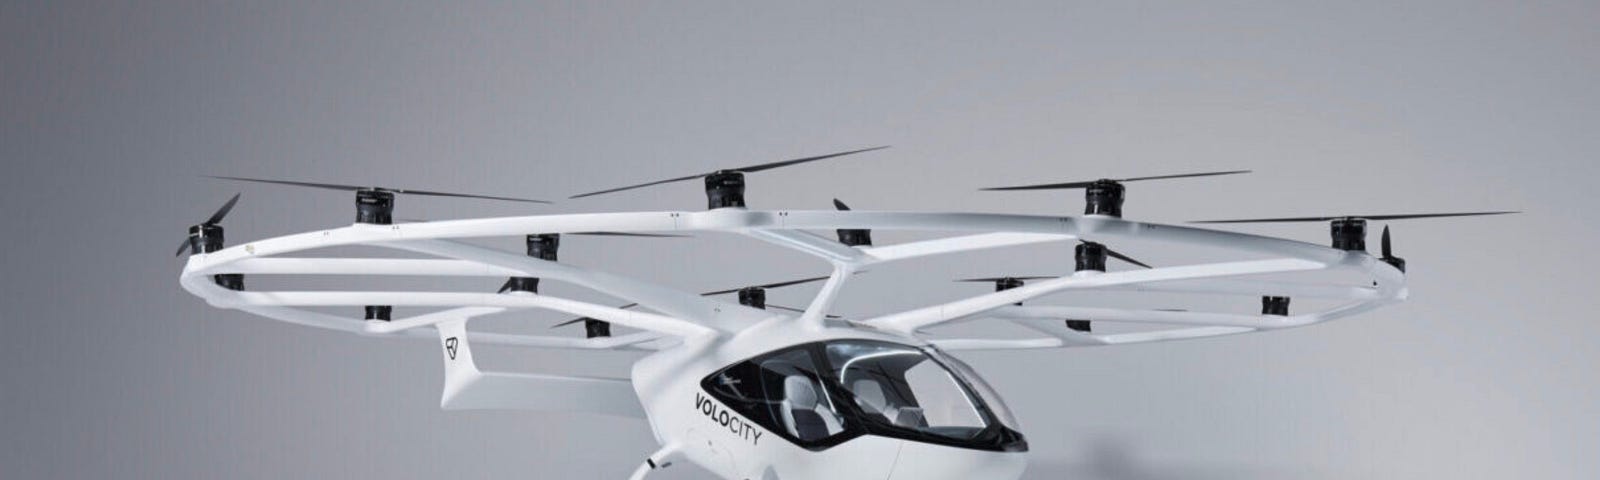 An overall view of the VoloCity eVTOL from Volocopter on full display